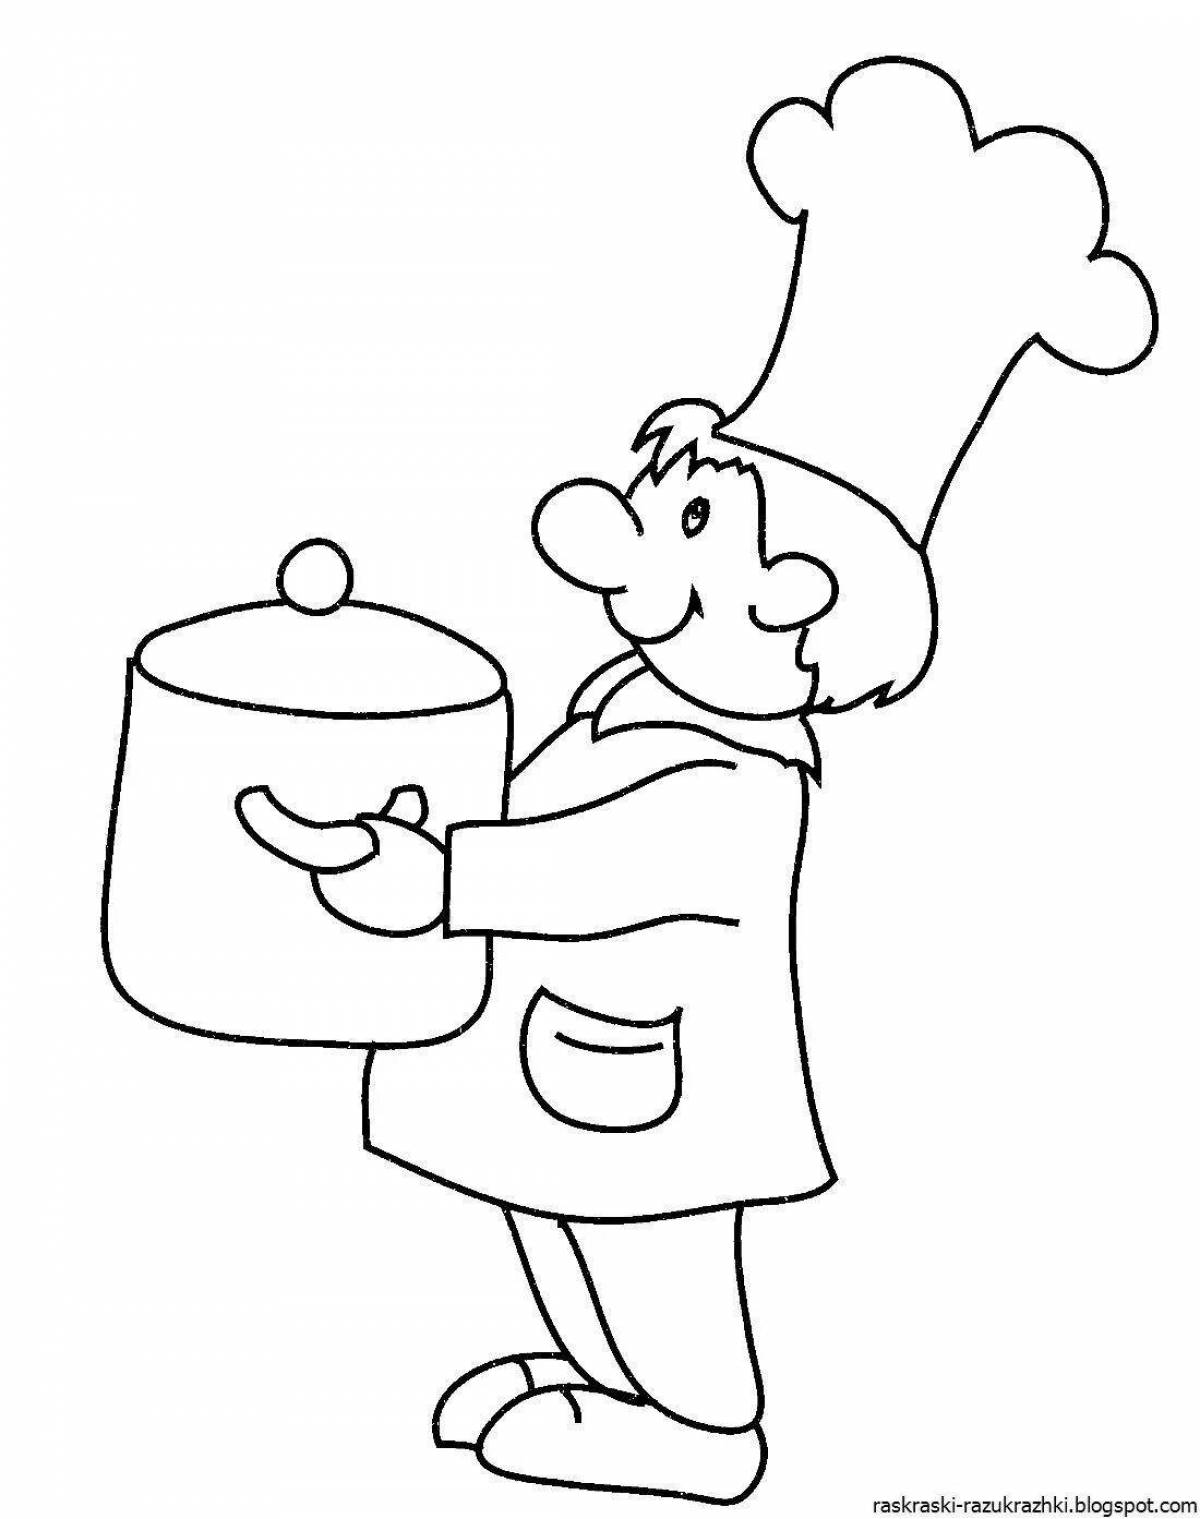 Coloring pages with playful cooks for kindergarten